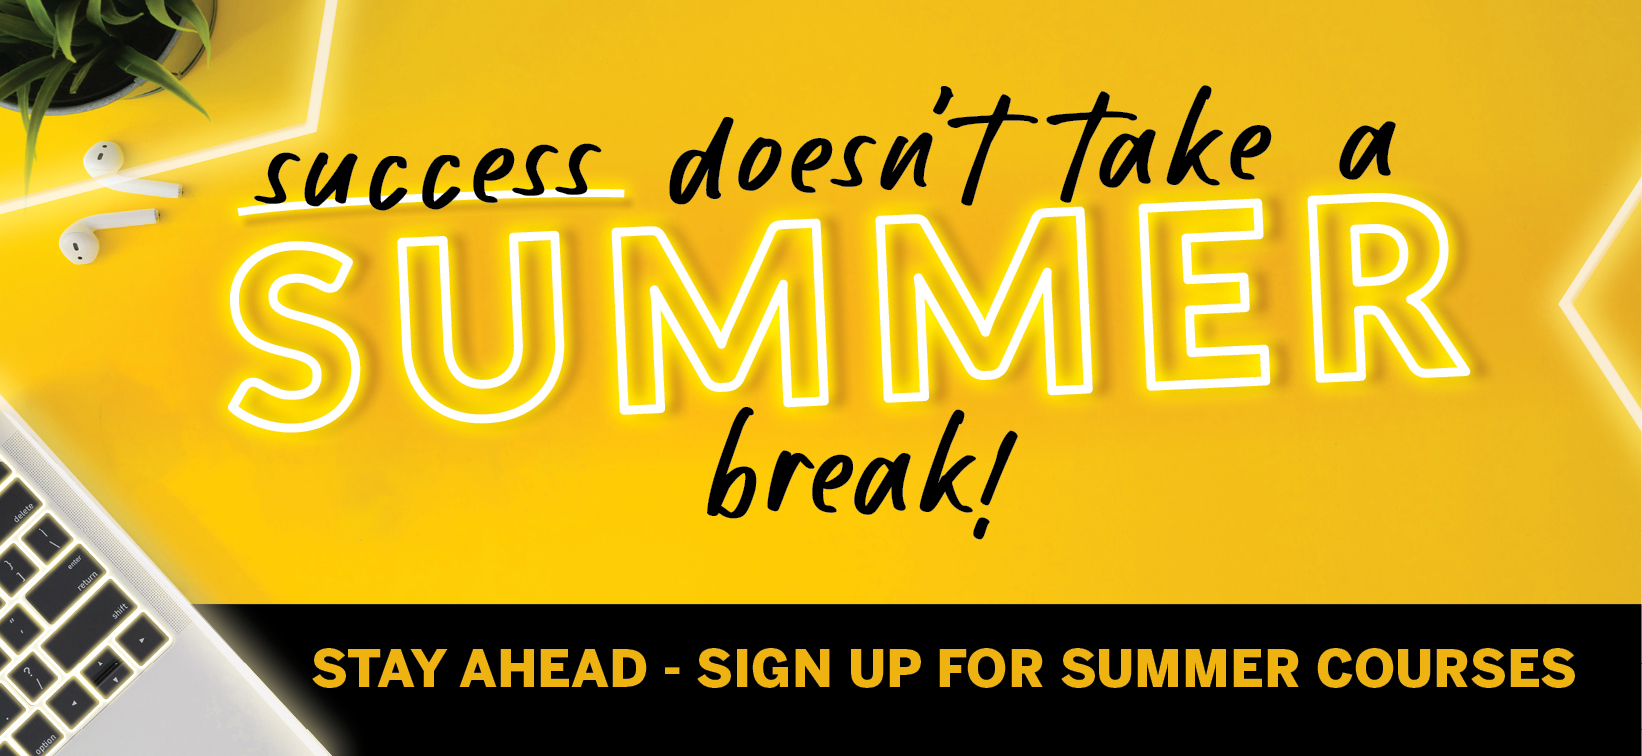 Take Your Summer Courses Online at SUNY Broome